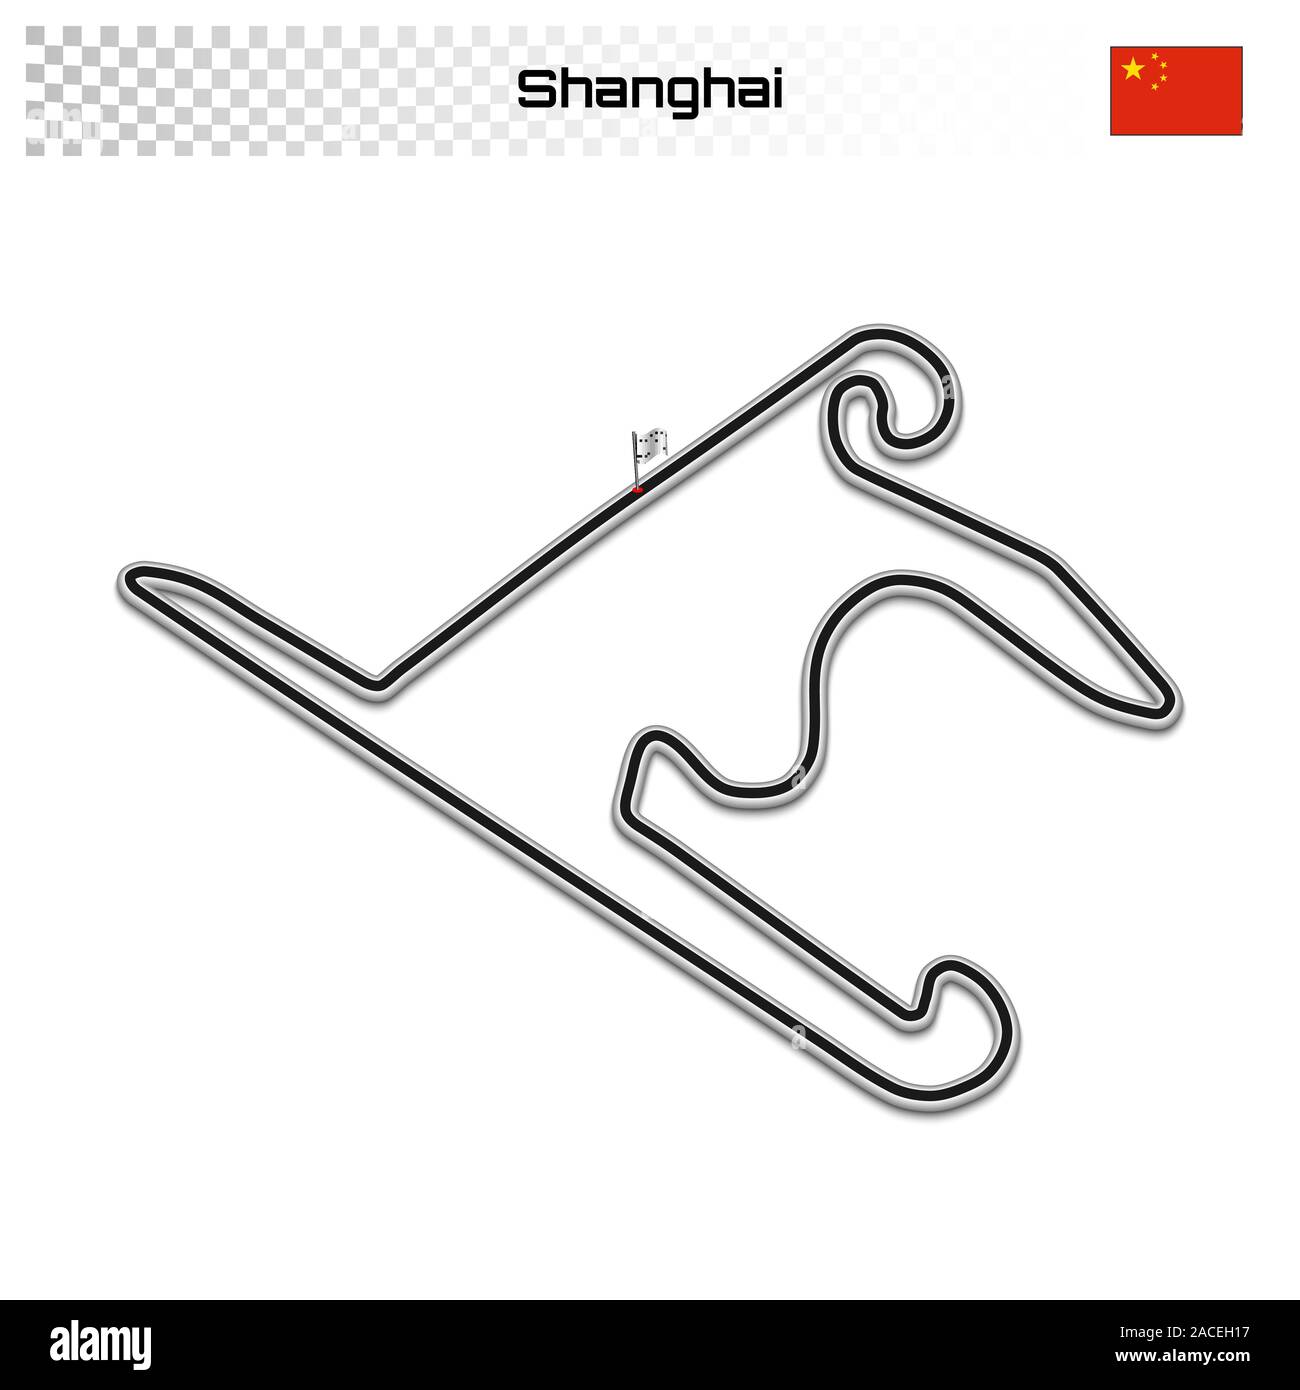 Shanghai circuit for motorsport and autosport. Chinese grand prix race track. Stock Vector